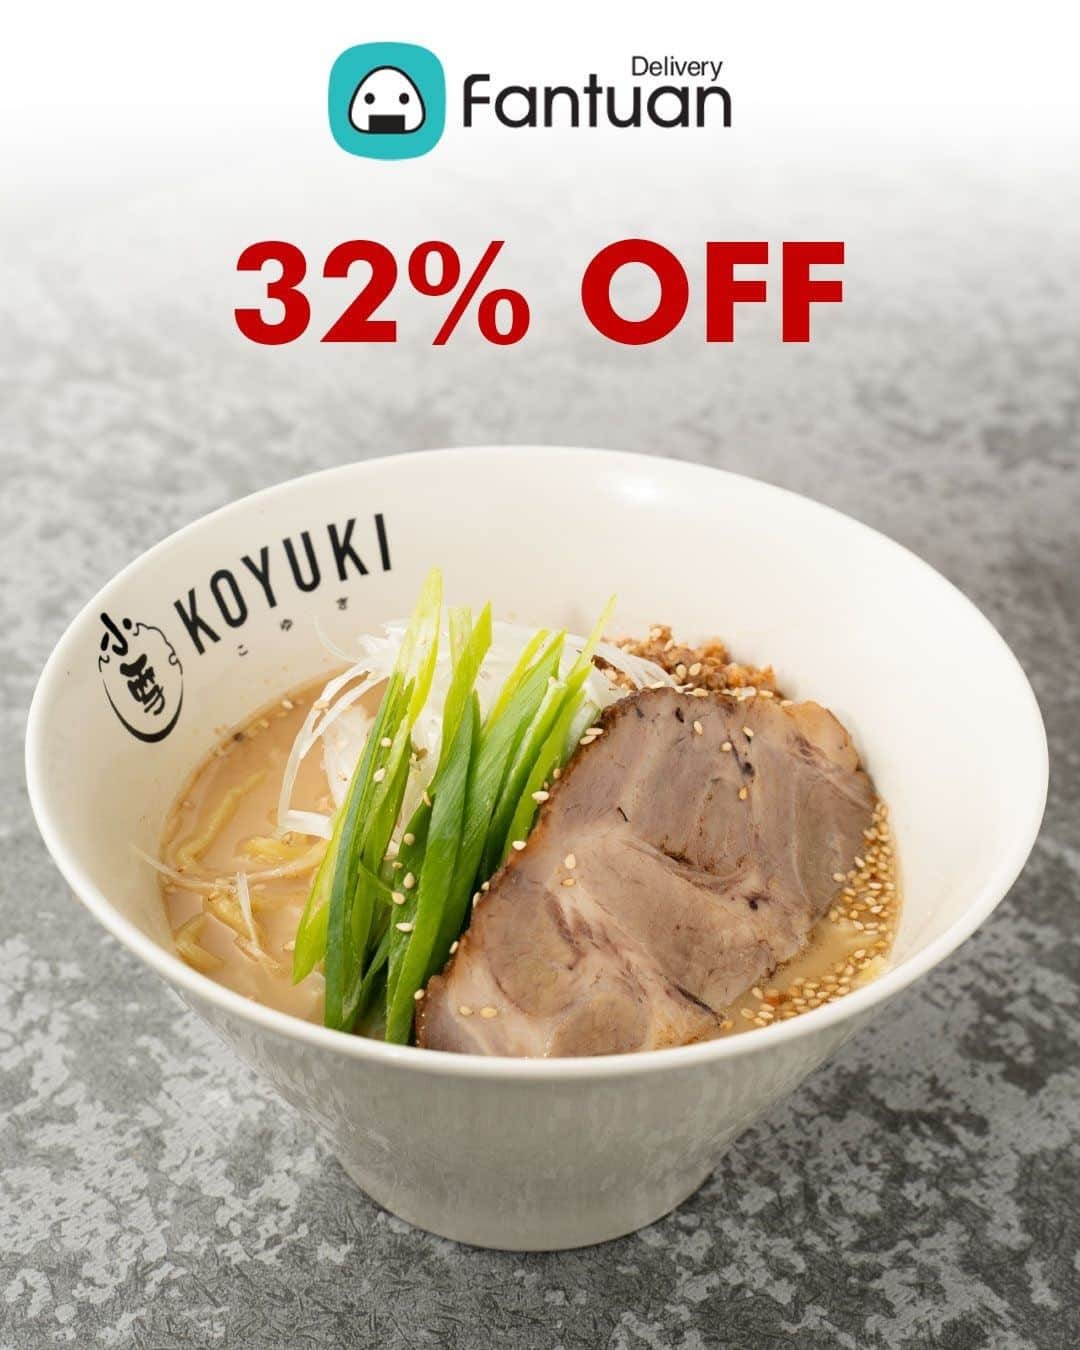 Koyukiのインスタグラム：「KOYUKI's all menu is available for delivery at 32% off on Fantuan starting Monday! Don't miss it! You can download Fantuan APP from the link on our profile page.  #ramennoodles #japanesefood #visitjapan #foodcouver #eatcouver #foodphotography #foodielife #dailyfoodfeed #f52grams #japanesenoodles #noodlelover #narcityvancouver #curiocityvan #crunchvancouver #vanfoodie #eatwithme #vancouvergiveaway #delivery #fantuan  #yvreats #yvrfoodie #604now #604eats #vancouverfoodie #vancityeats #vancouvereats #dishedvan #robsonstreet #ramenlover」